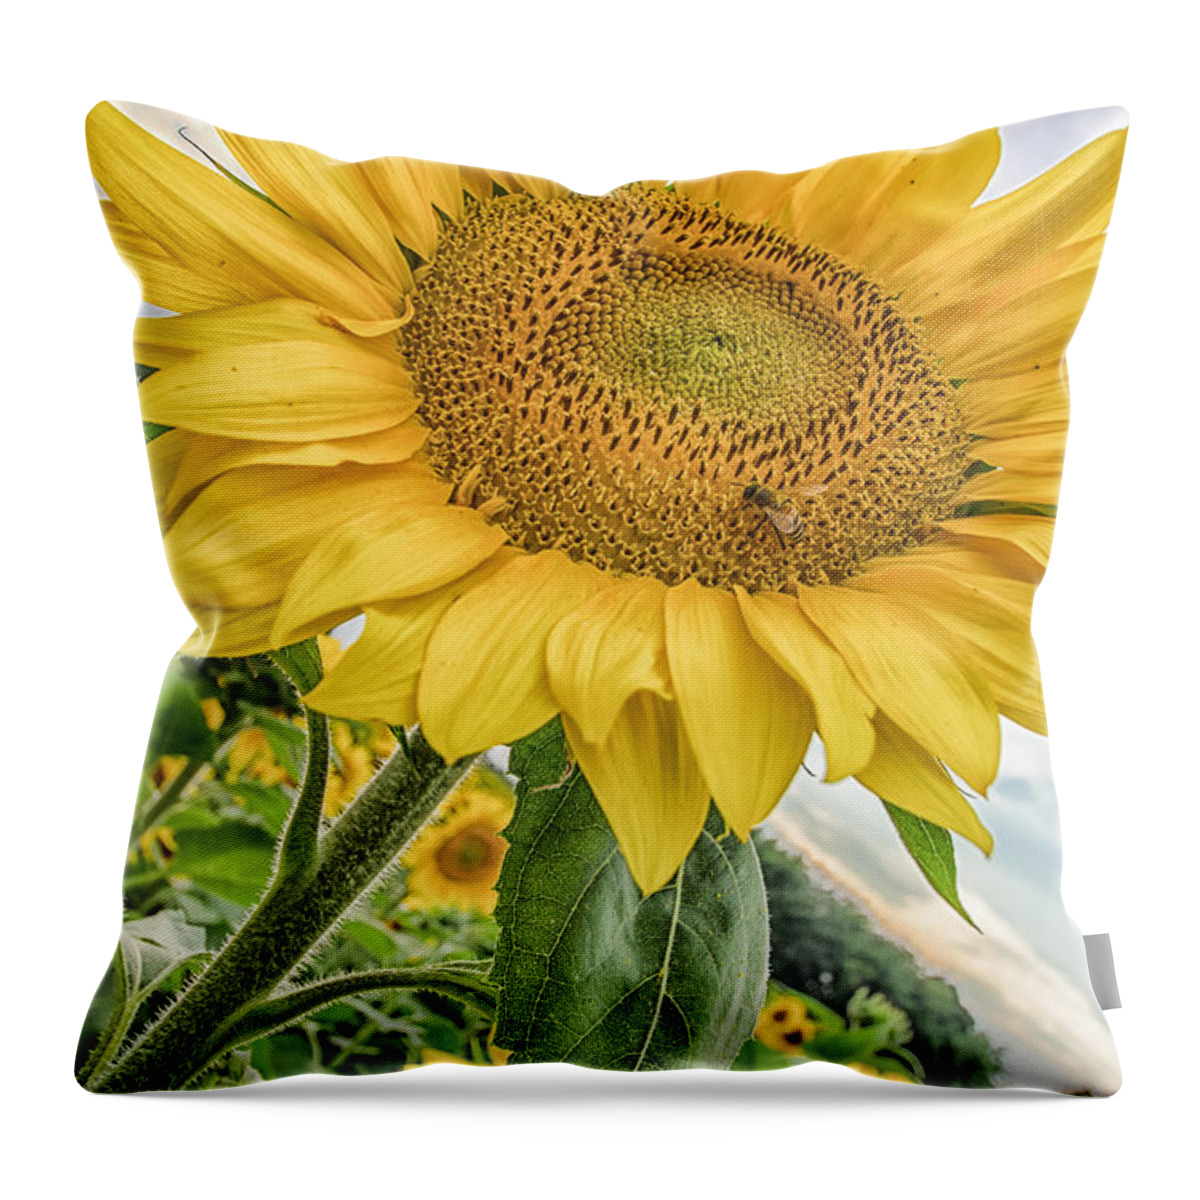 Sunflower Throw Pillow featuring the photograph The Sunflower and The Bee by Bert Peake